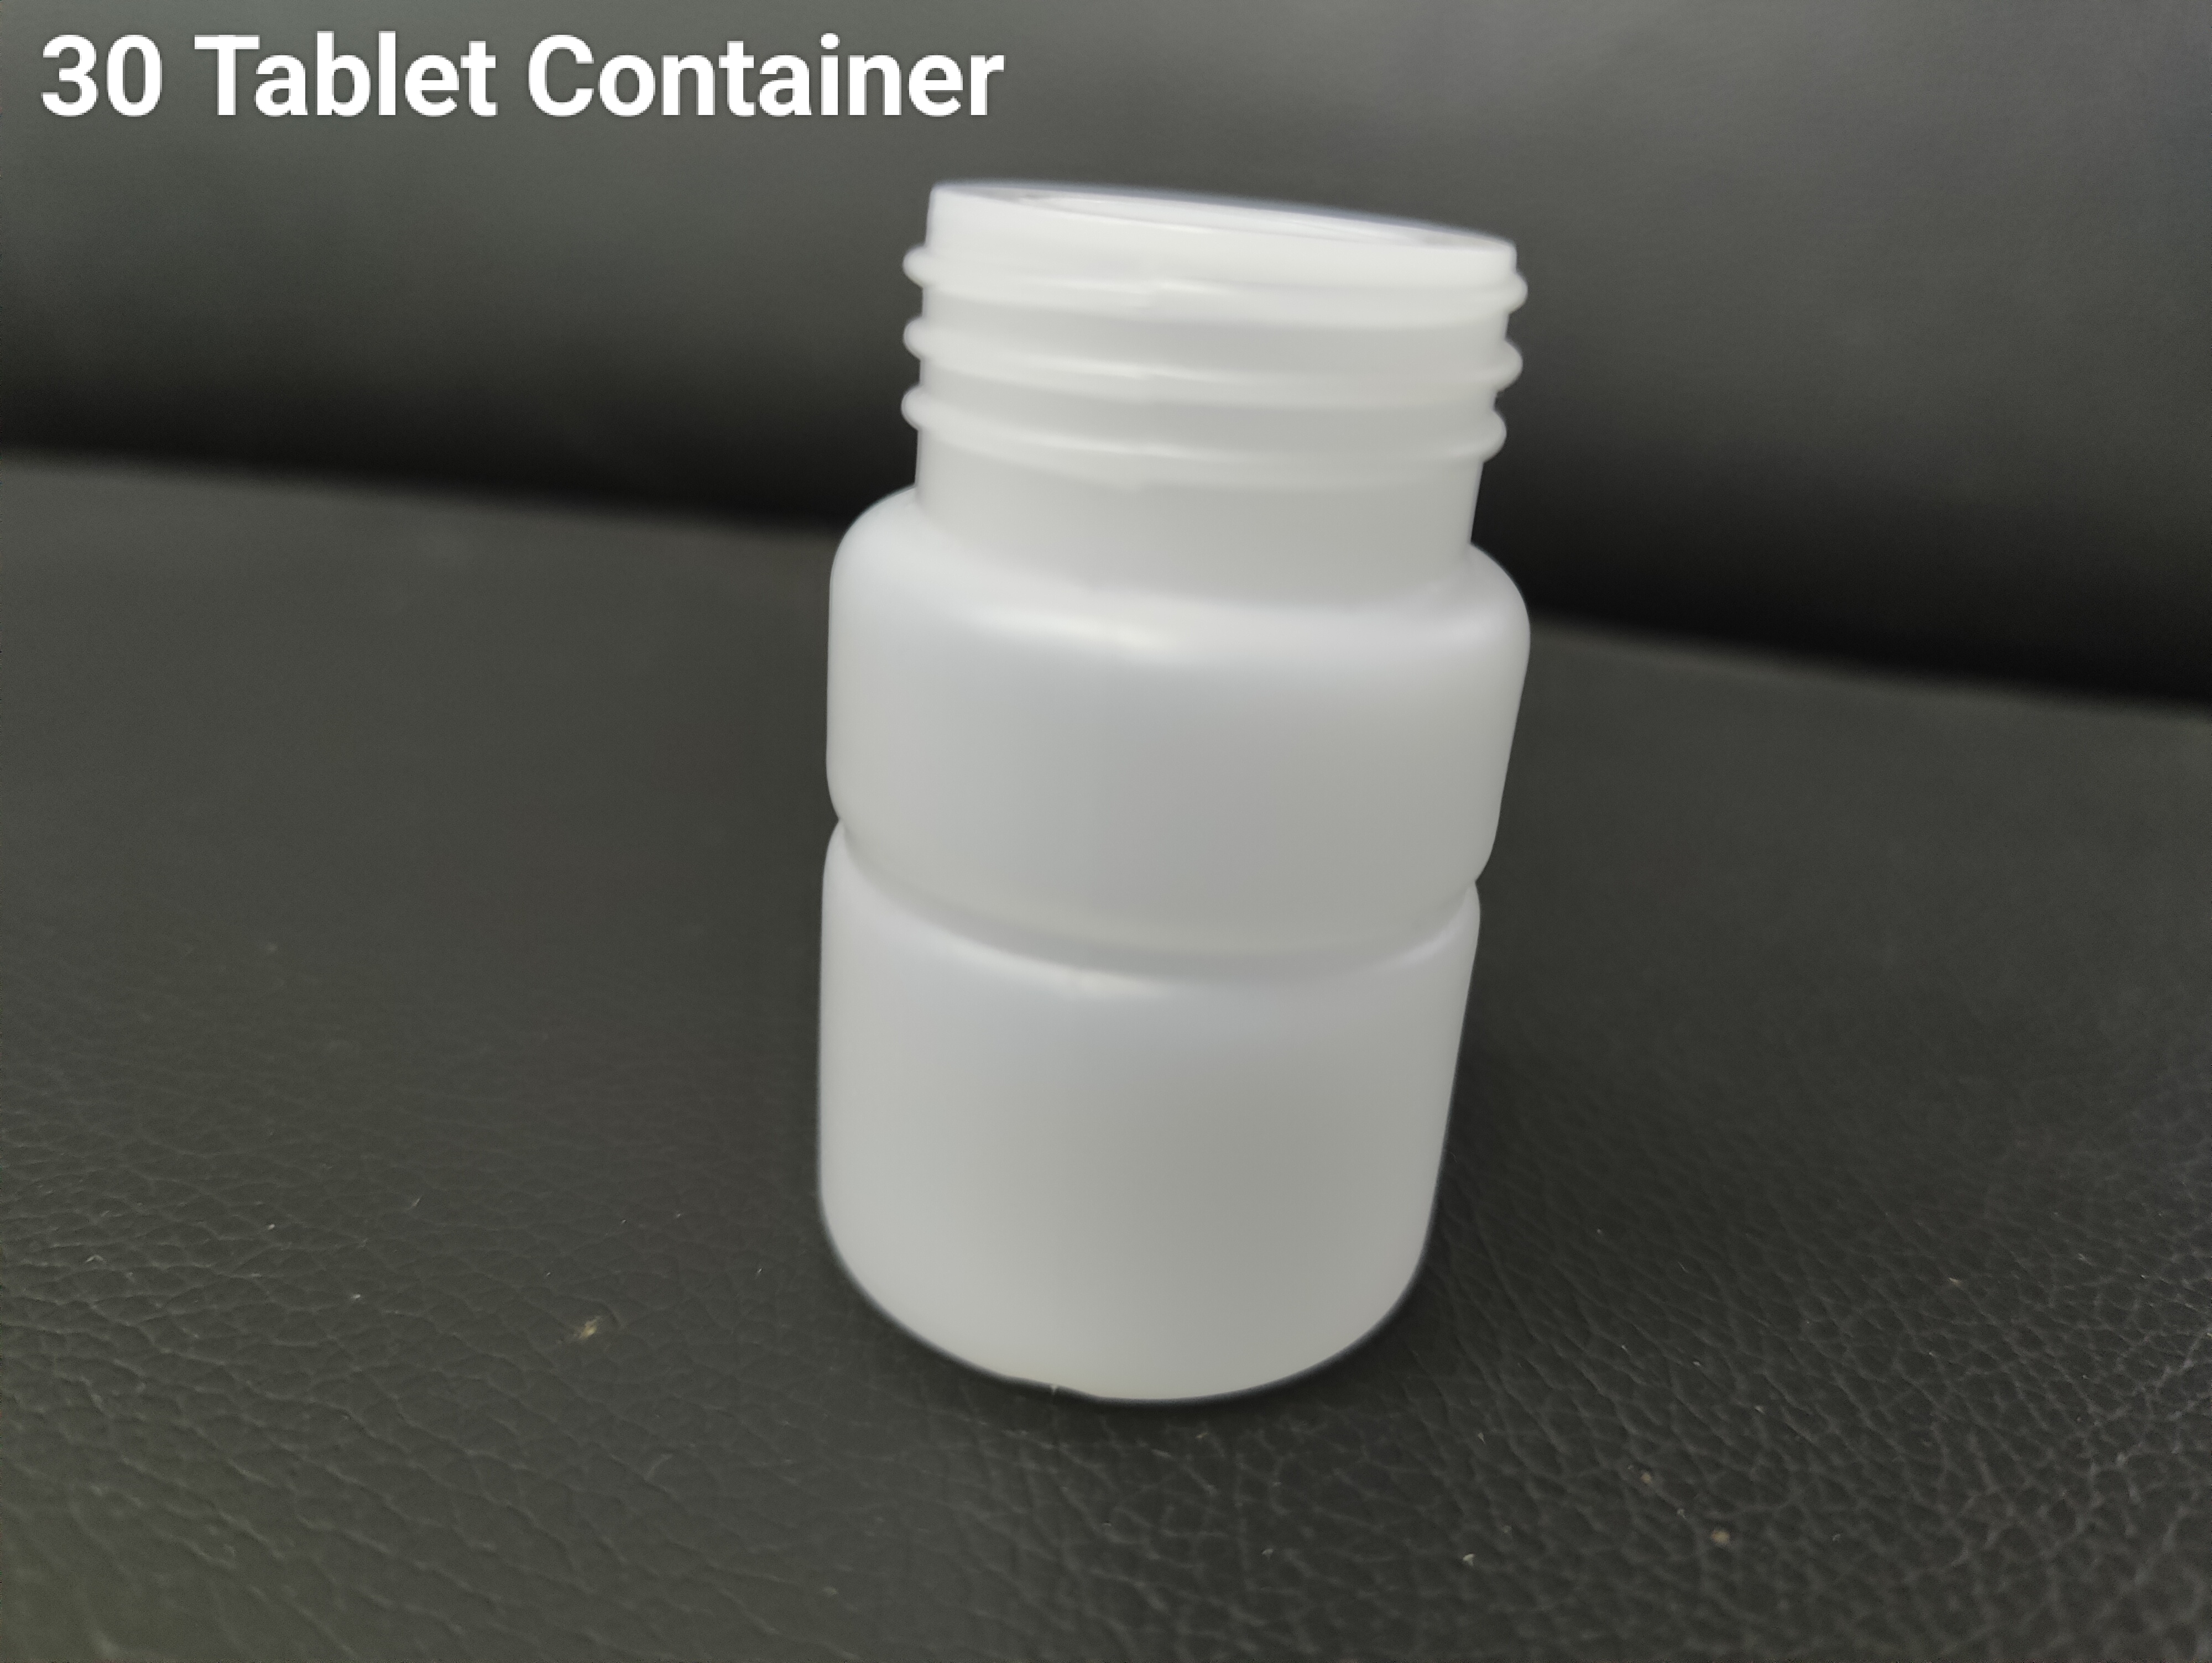 hdpe Tablet Container 30 TABLETS